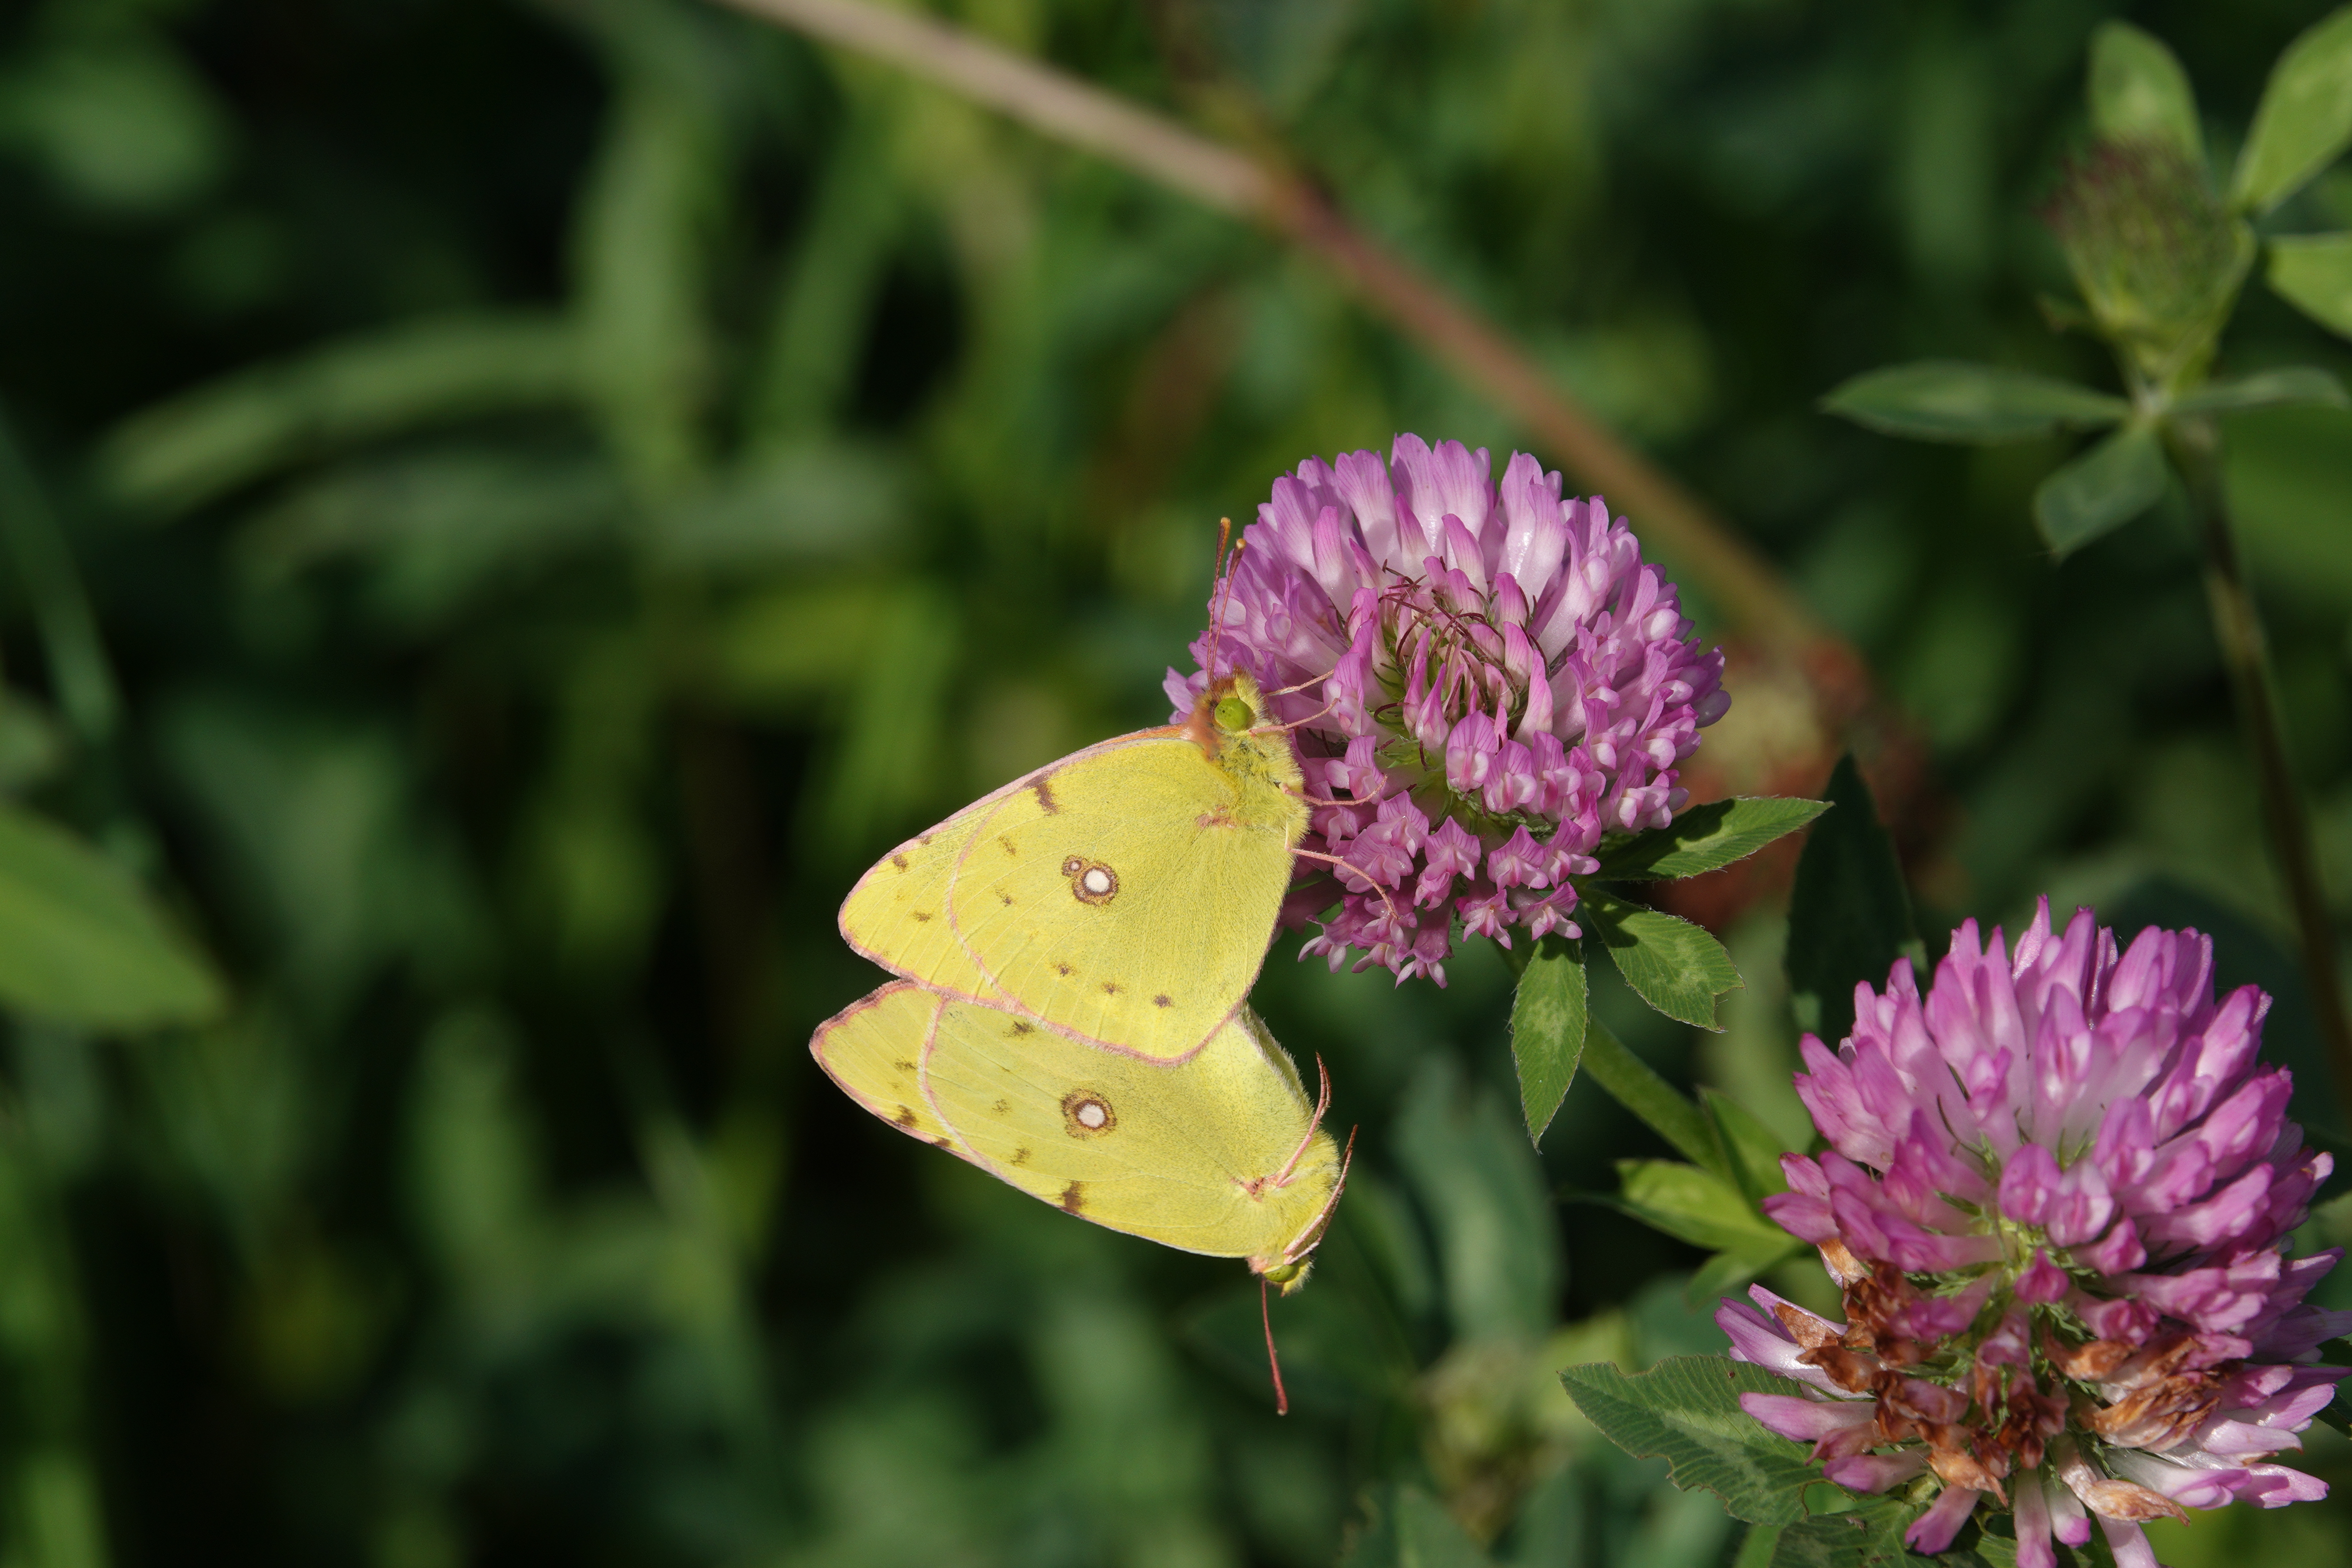 Clouded Yellows ensuring the continuation of the species. 'Just hang on in there, babe!'